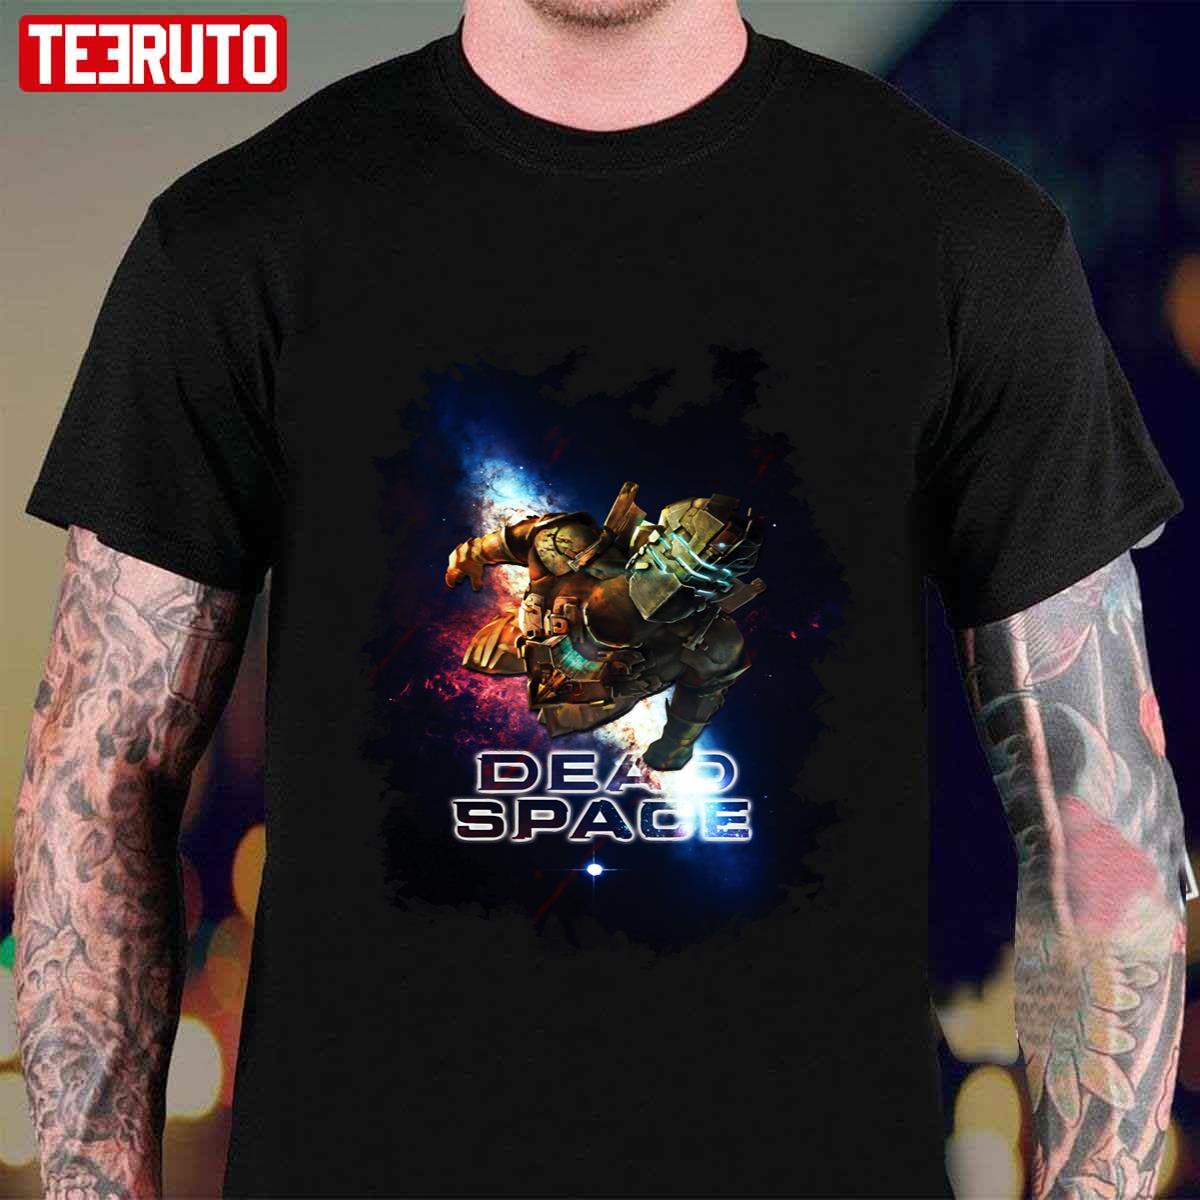 dead space game t shirt